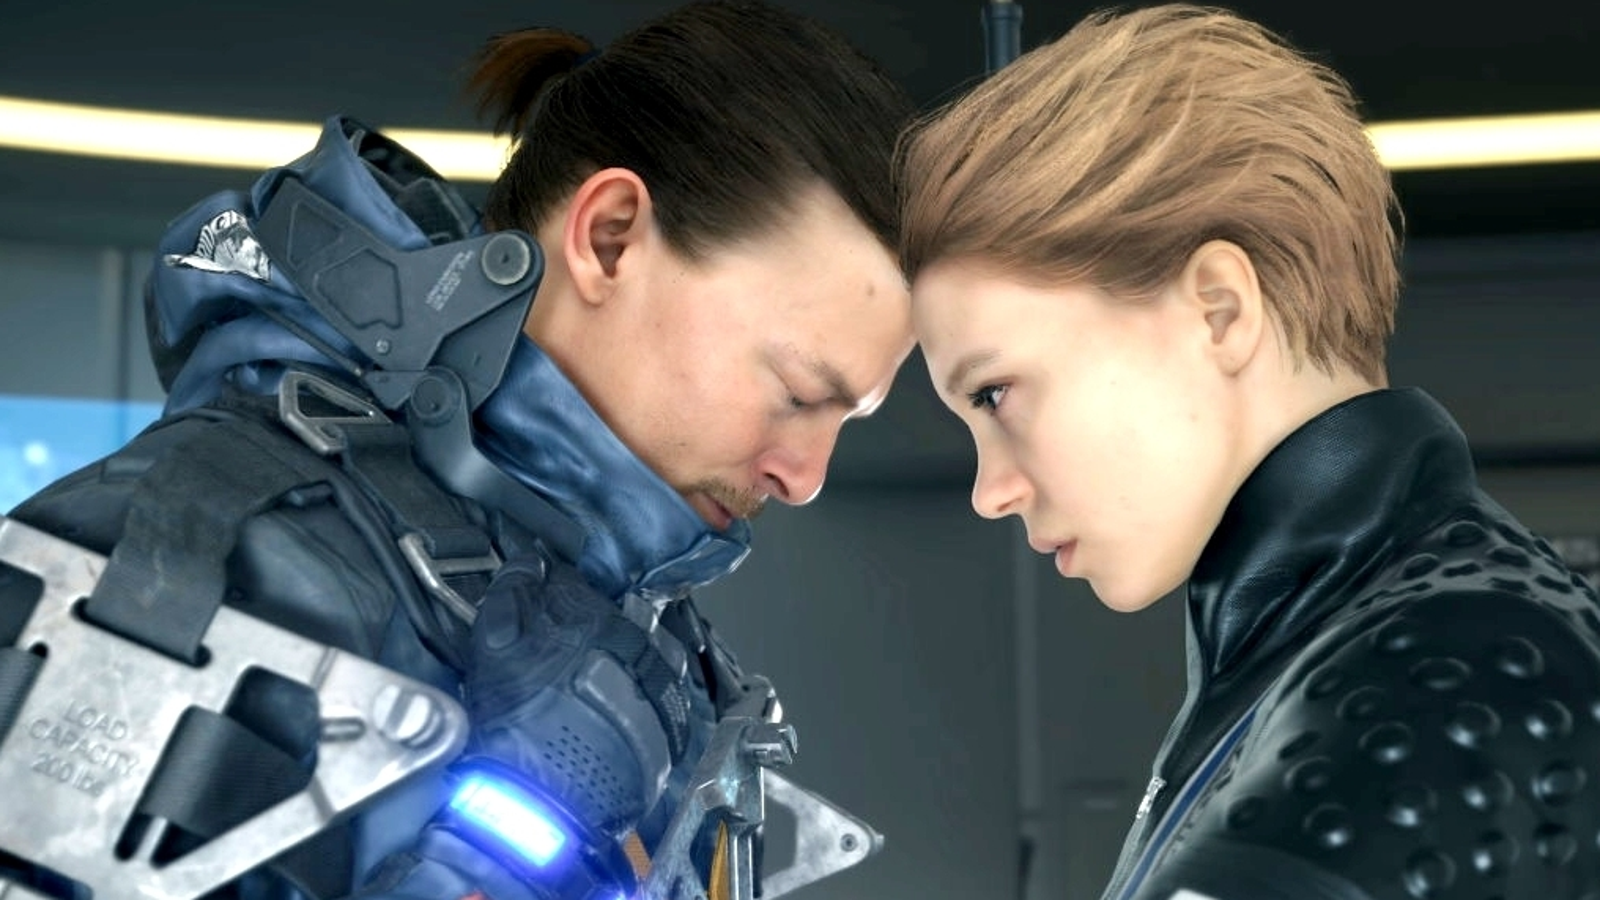 Death Stranding' Makes Human Connections, Even In Isolation : NPR